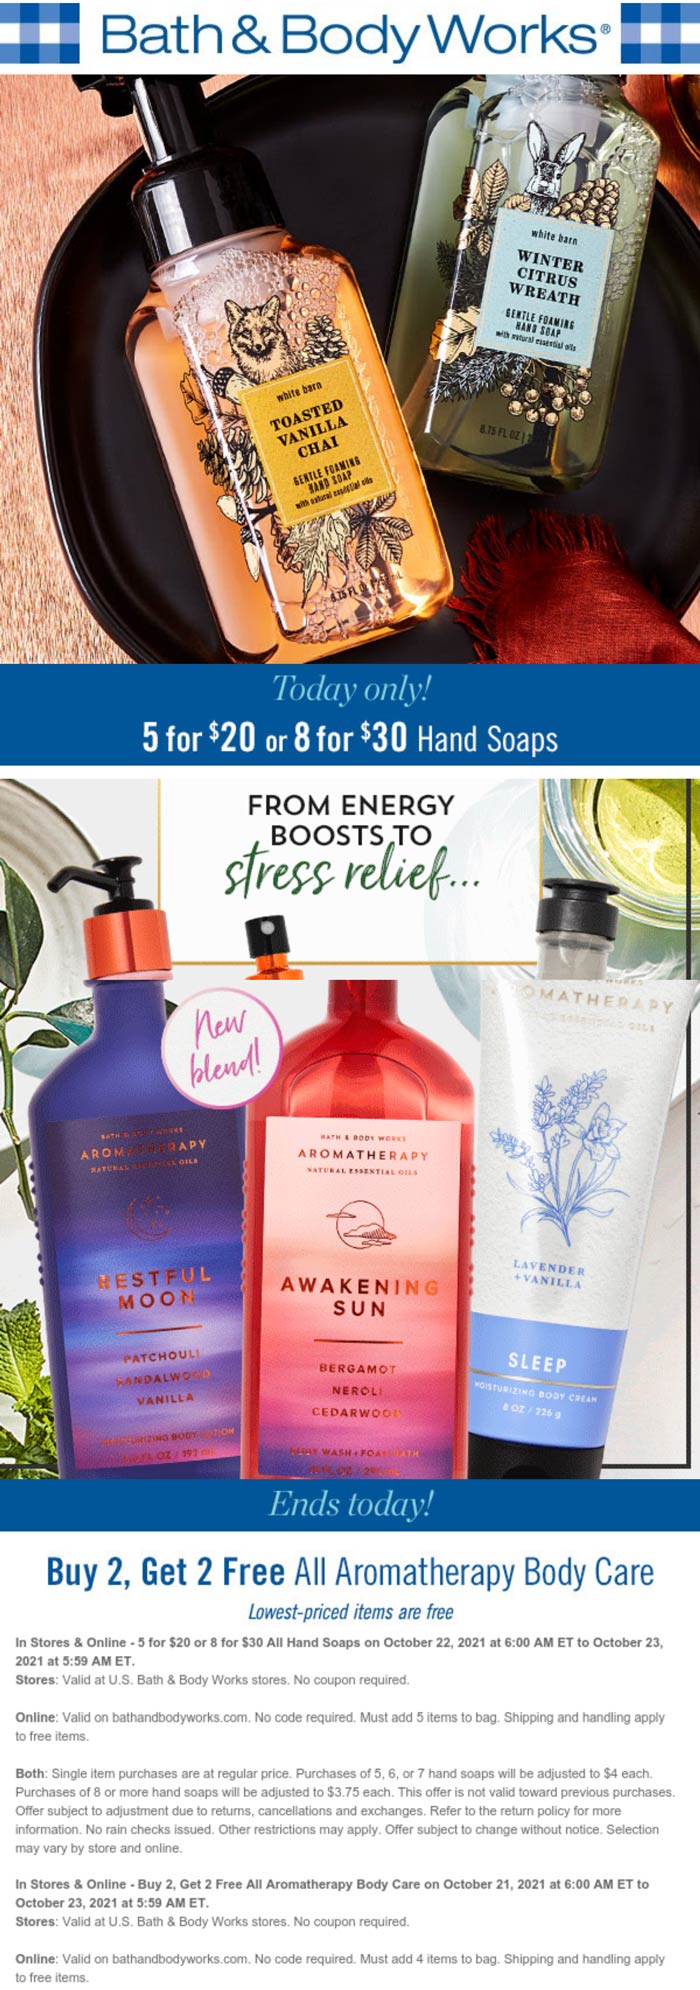 Bath & Body Works stores Coupon  8 hand soaps for $30 today & 4-for-2 on body care at Bath & Body Works, ditto online #bathbodyworks 